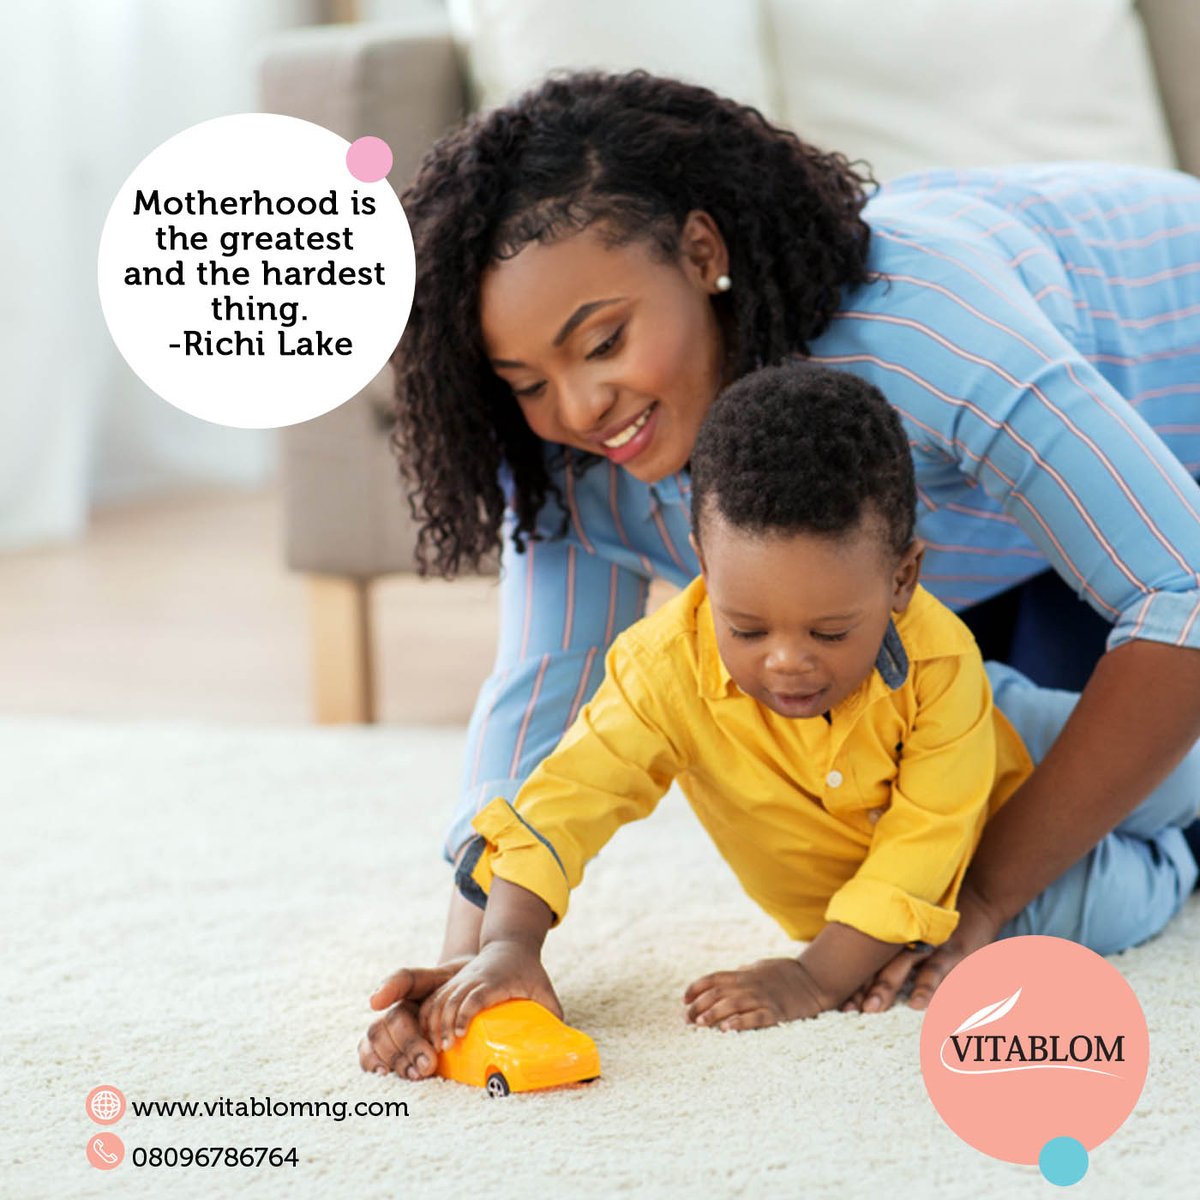 Although motherhood can be tough, it is the most beautiful experience. Hence we designed a range of products  to make the journey a lot easier on you. 
#vitablomng #nursingpillow #vitablom #bedsheet #playmatbaby #babypouf #mother #motherhoodjourney #mondaymorning #MondayMotivaton